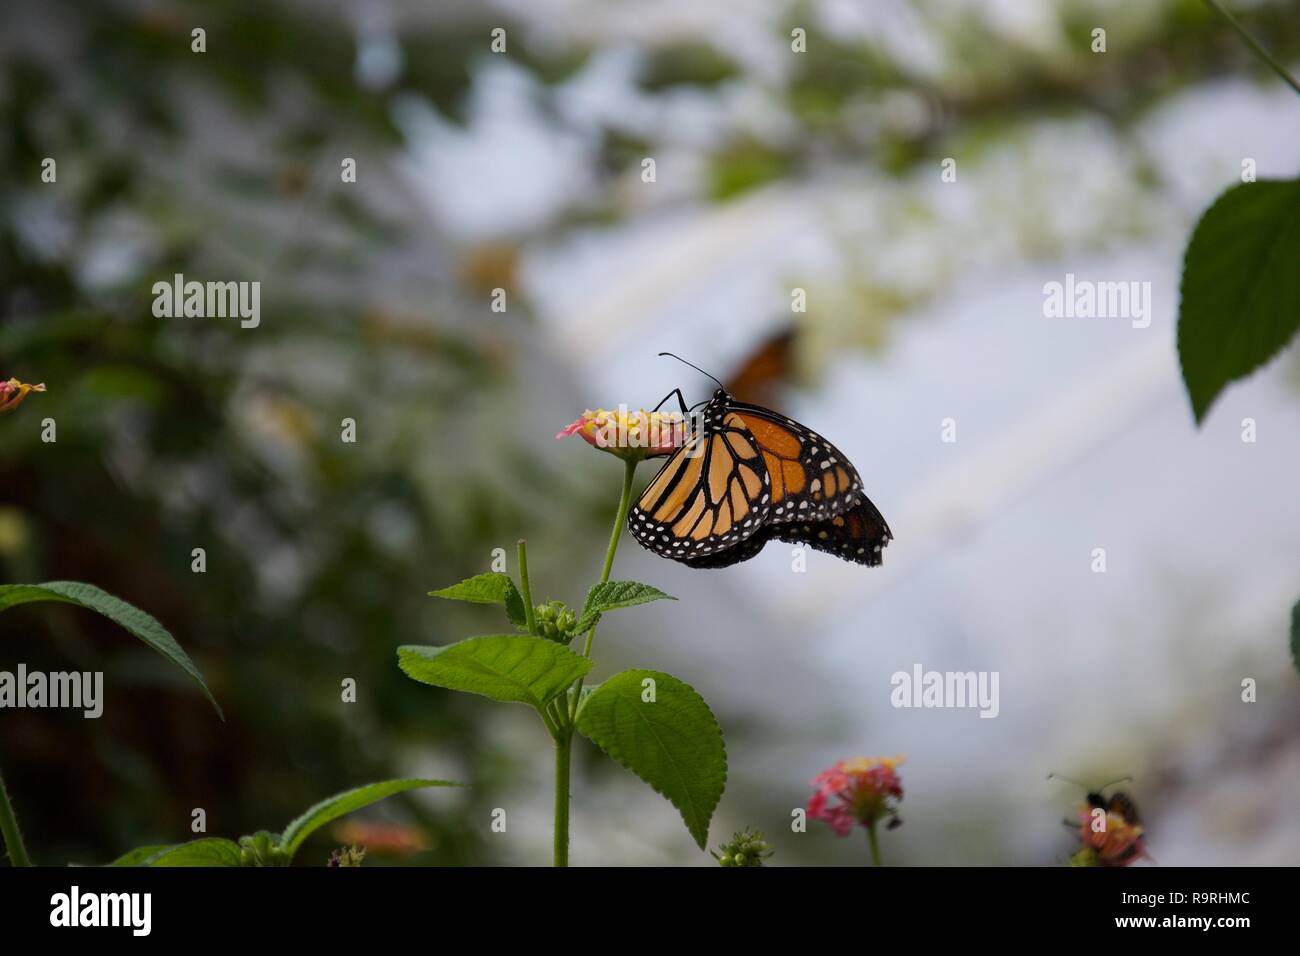 An orange, yellow and black butterfly with closed wings sipping from a flower Stock Photo